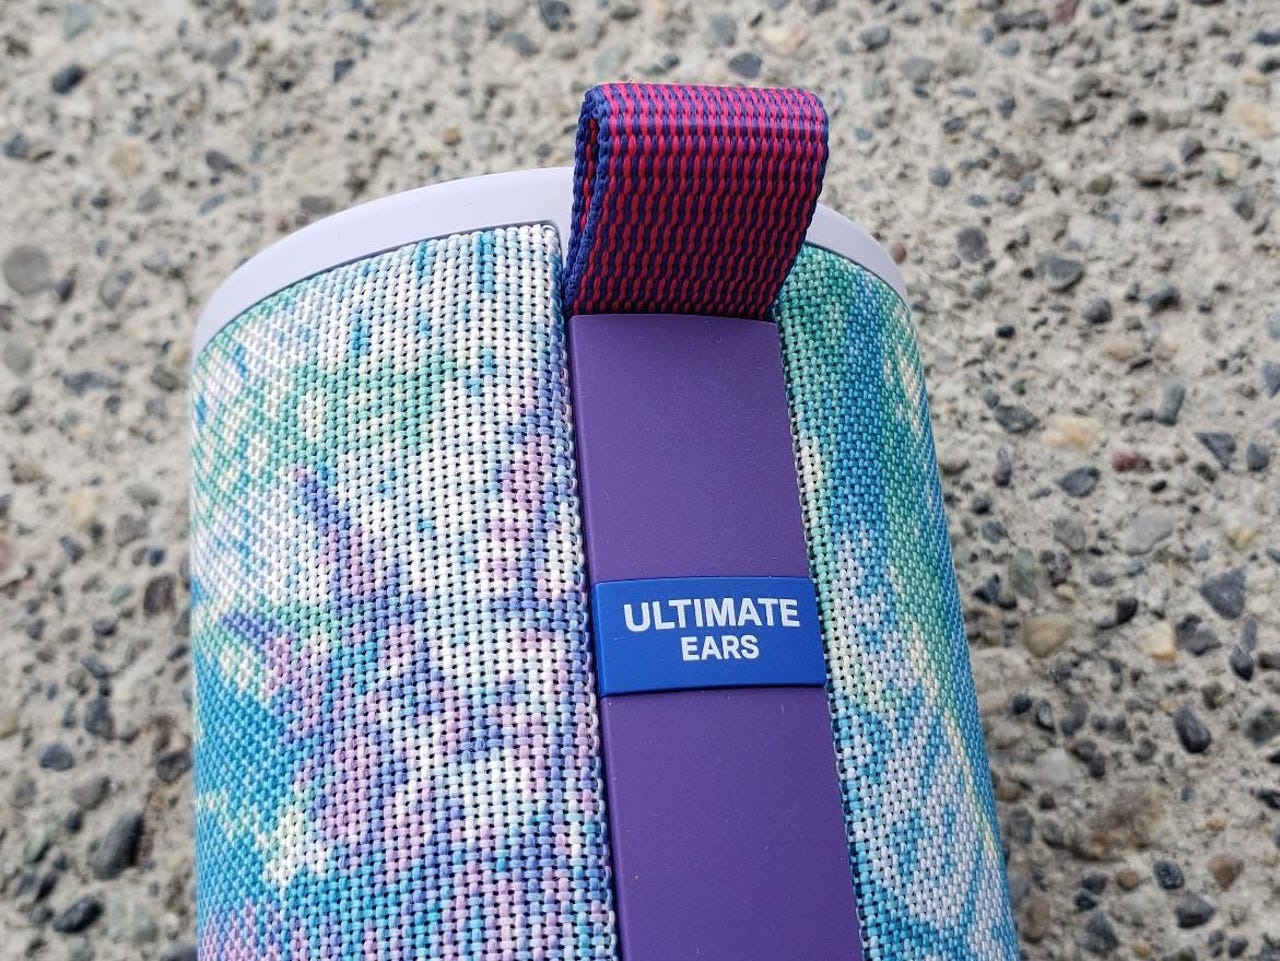 Ultimate Ears Boom 3 review